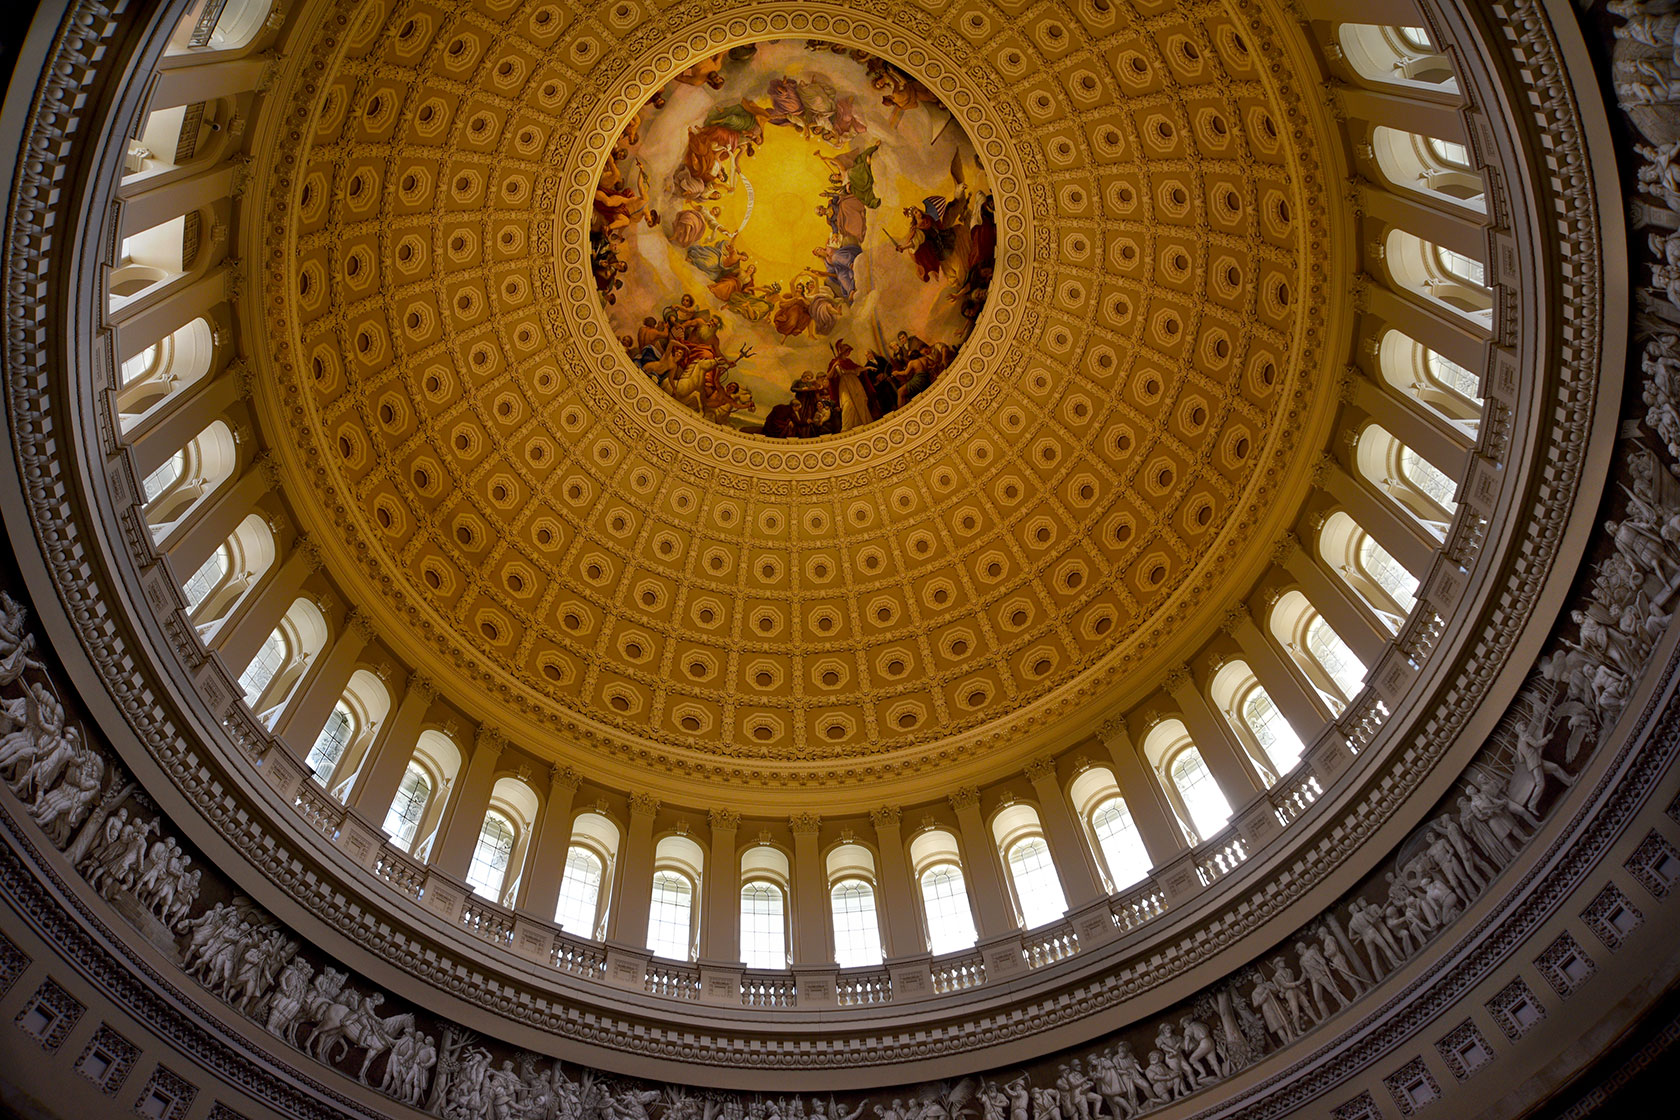 Photo shows the inner dome of the U.S. Capitol building.